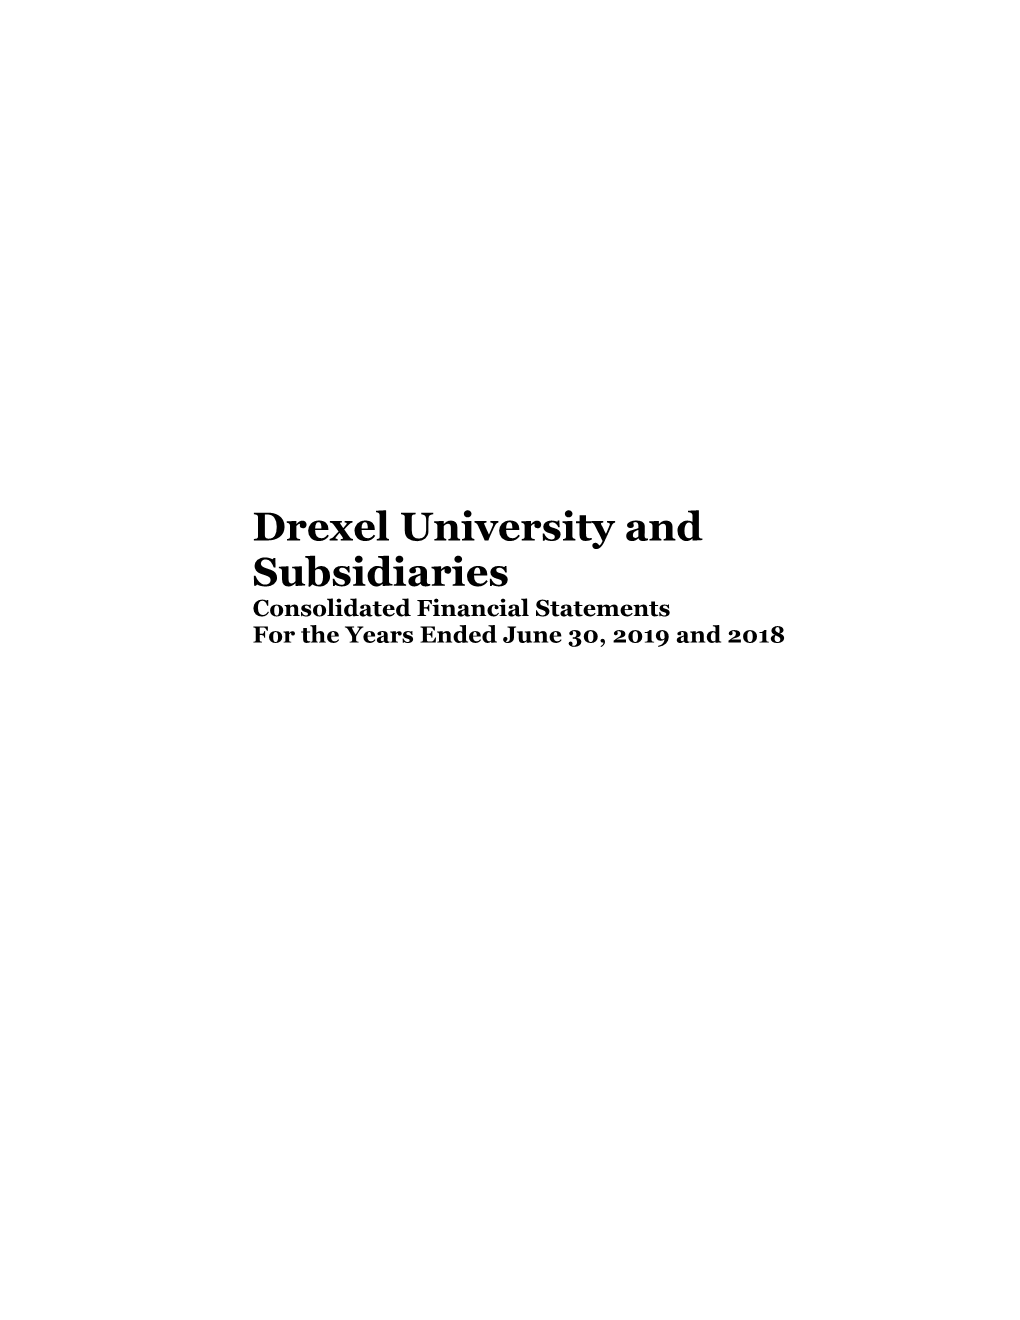 2019 Drexel University Consolidated Financial Statements [PDF]